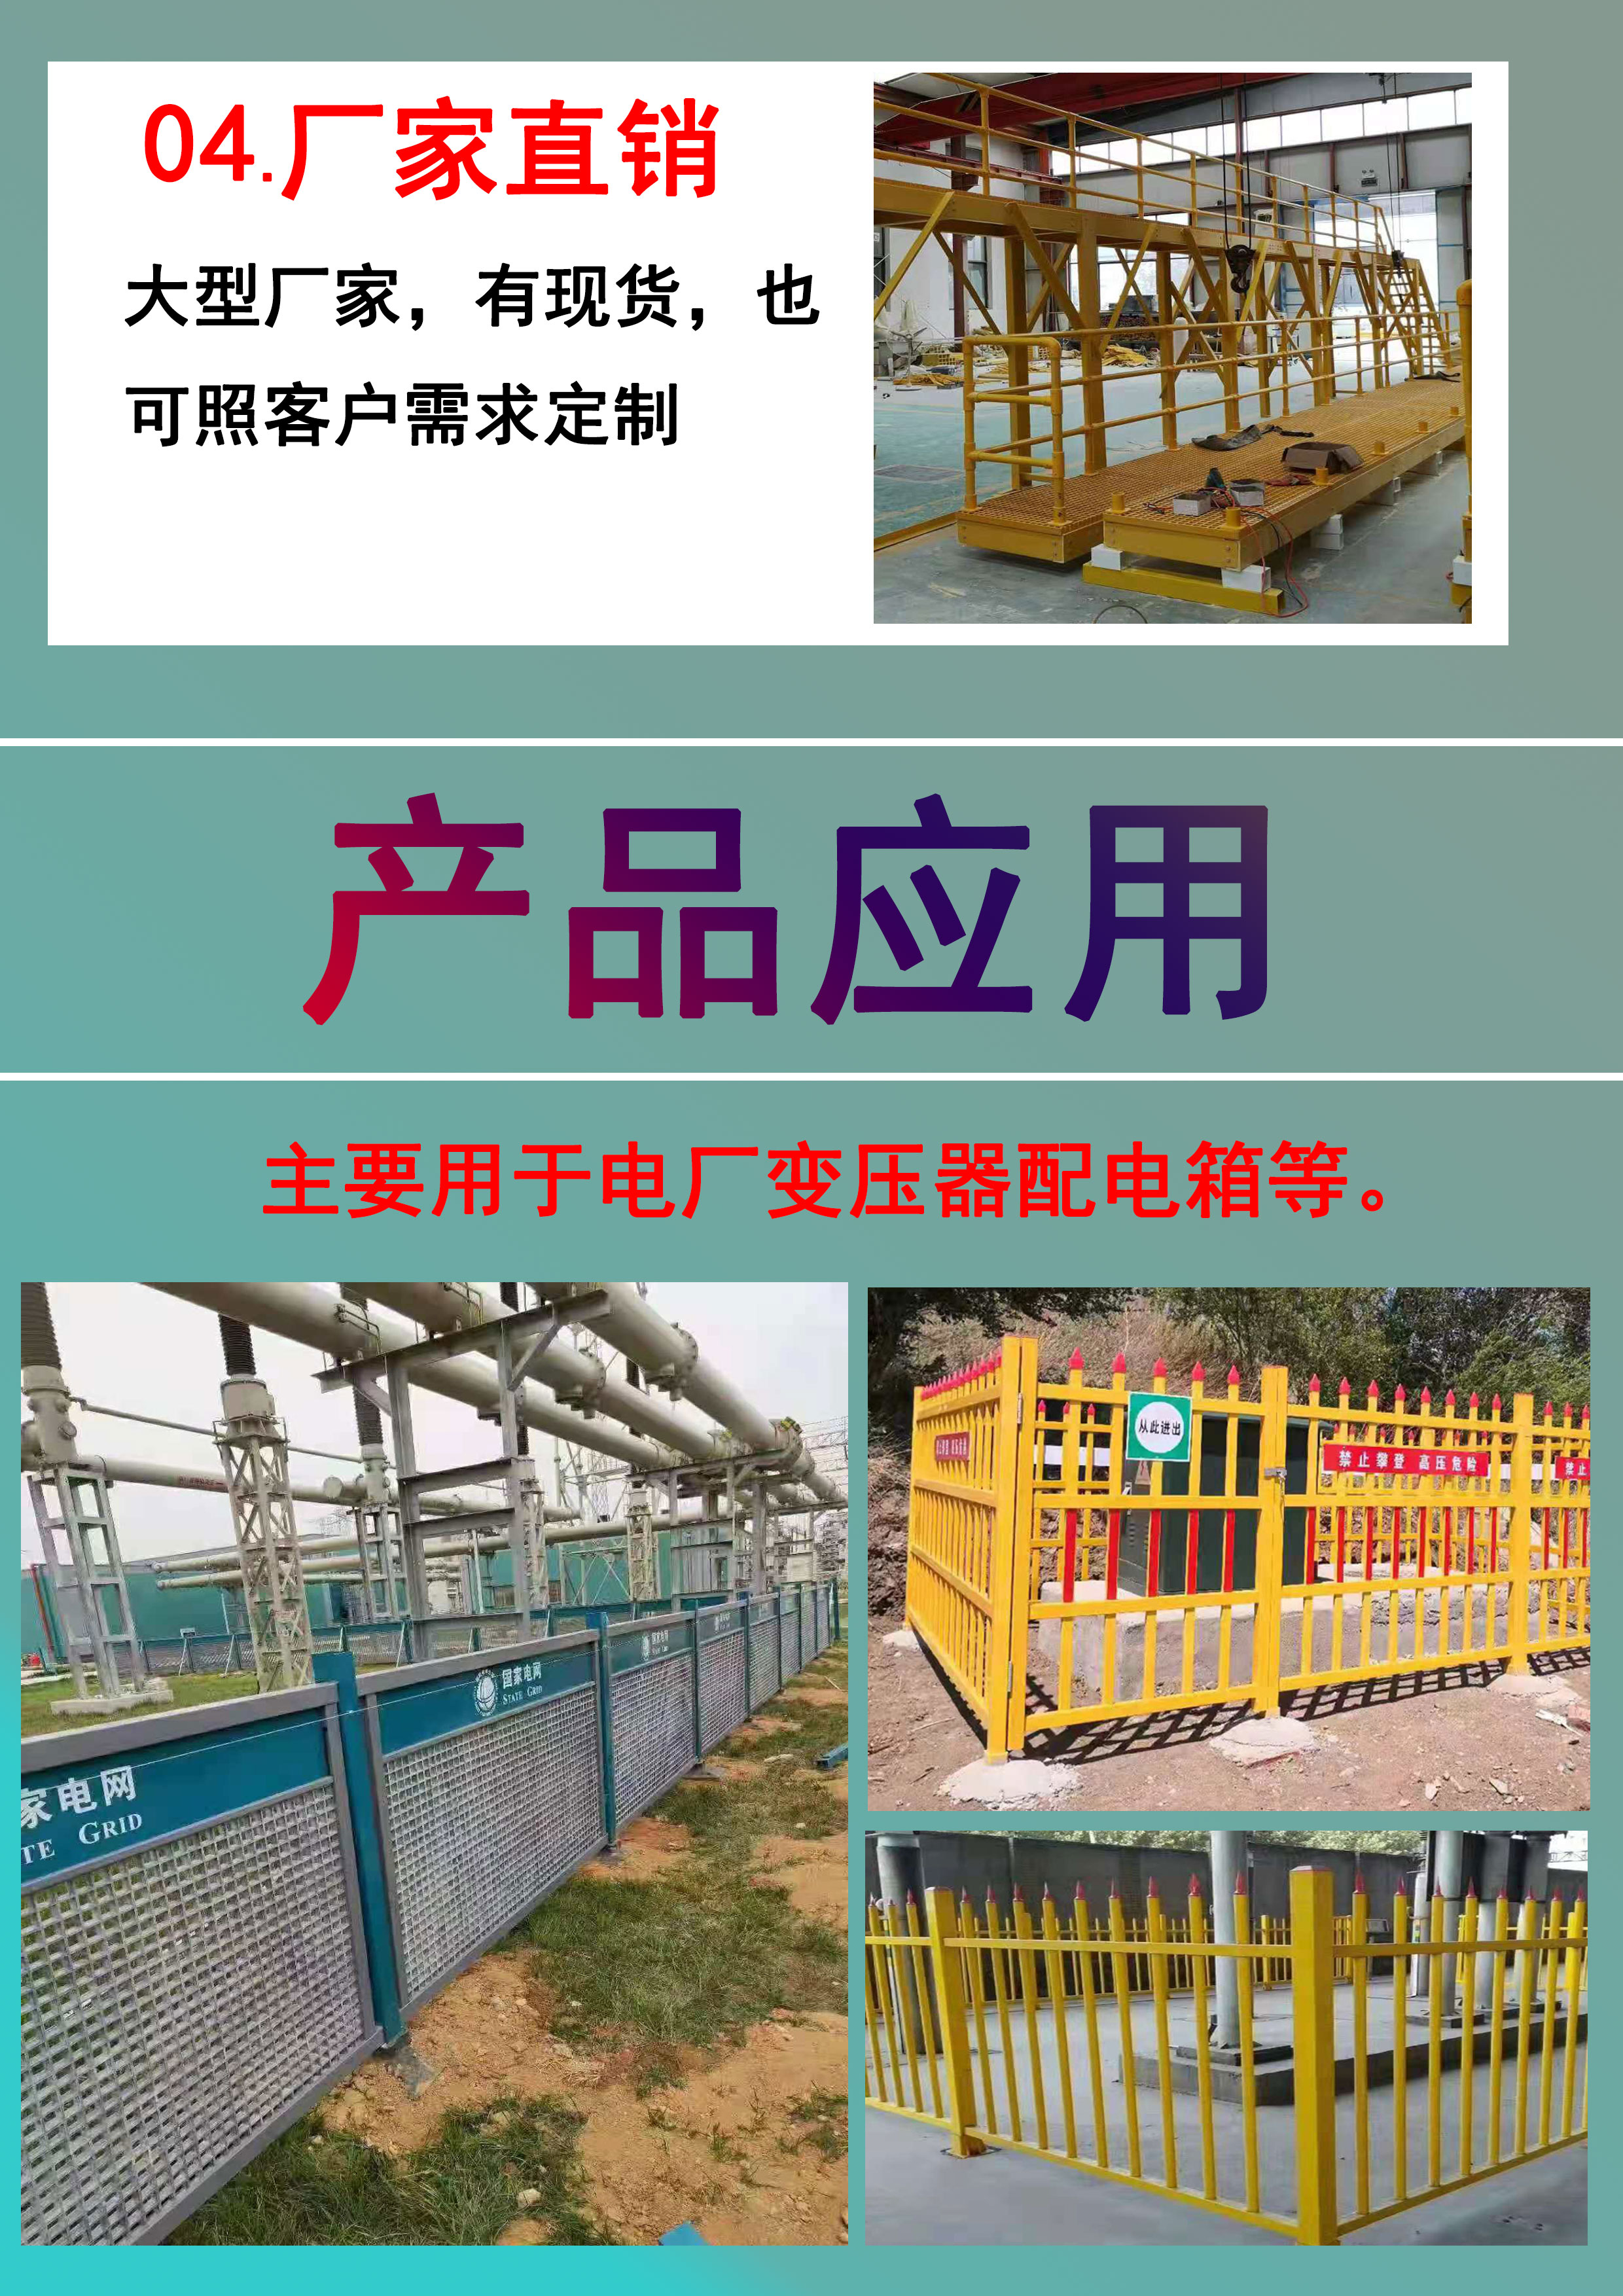 Fiberglass reinforced plastic fence, Jiahang Electric Power Safety Fence, Outdoor Oilfield Isolation Fence, Mobile and Scalable